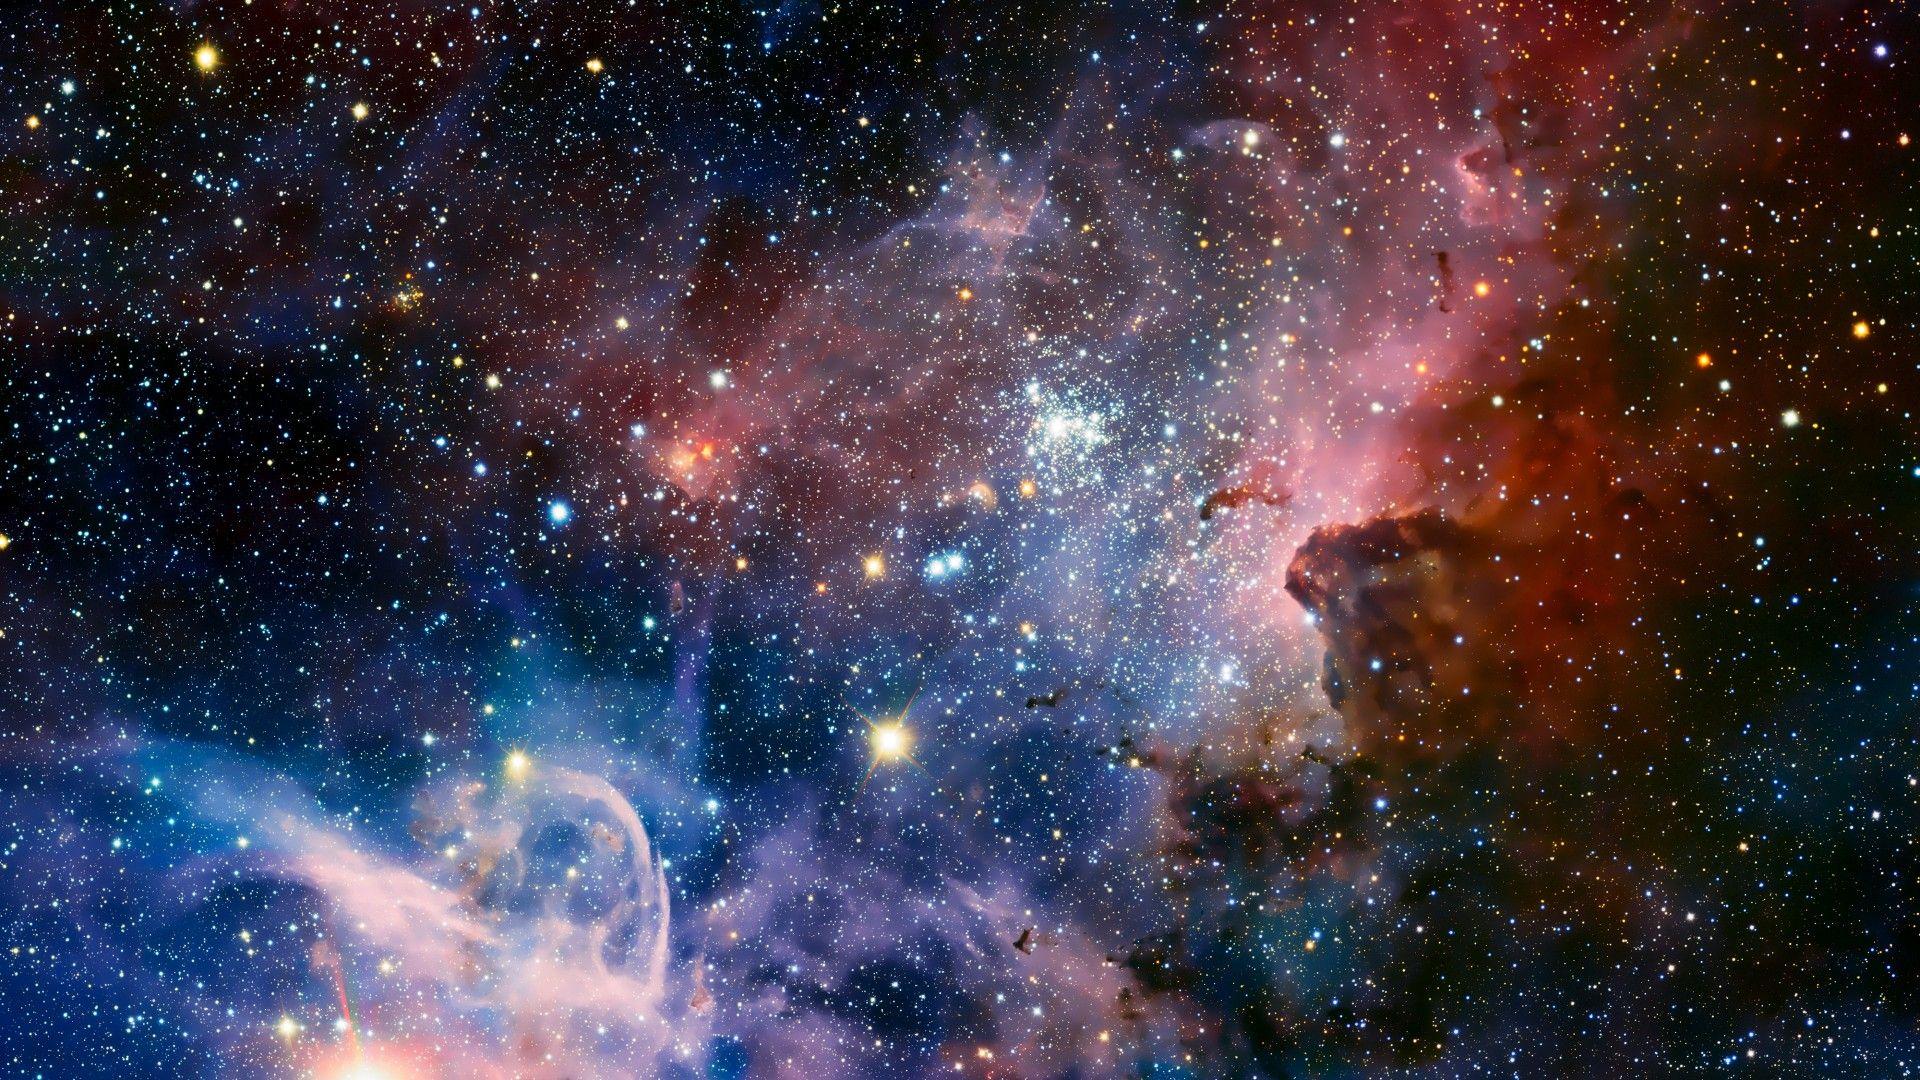 hubble space telescope images back grounds